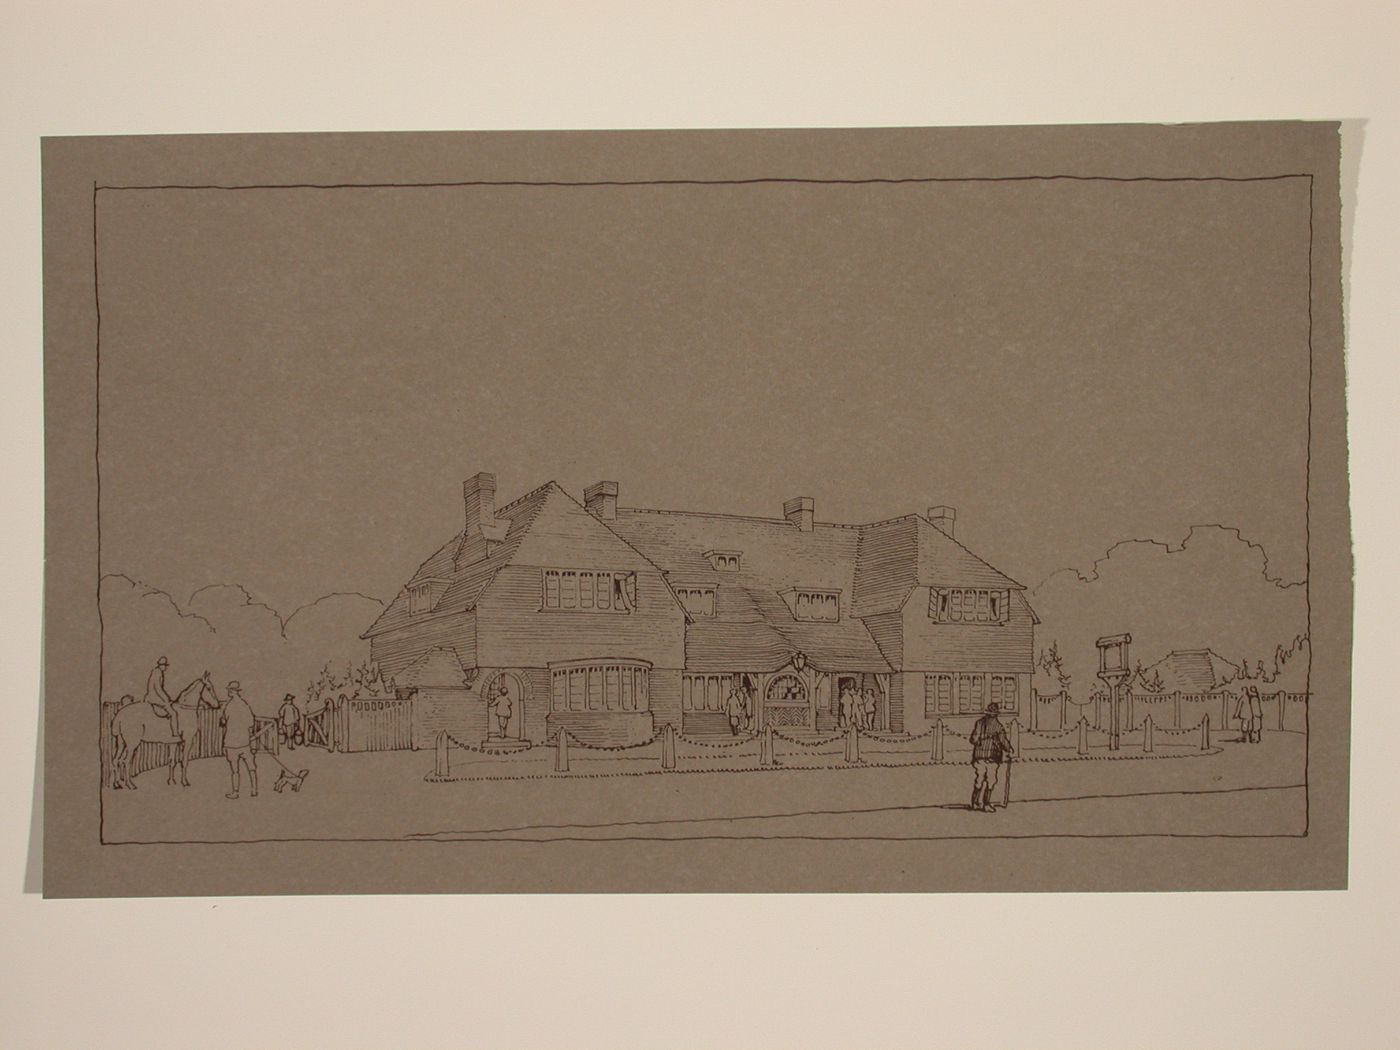 Perspectival view showing a large building set in the countryside, possibly a clubhouse